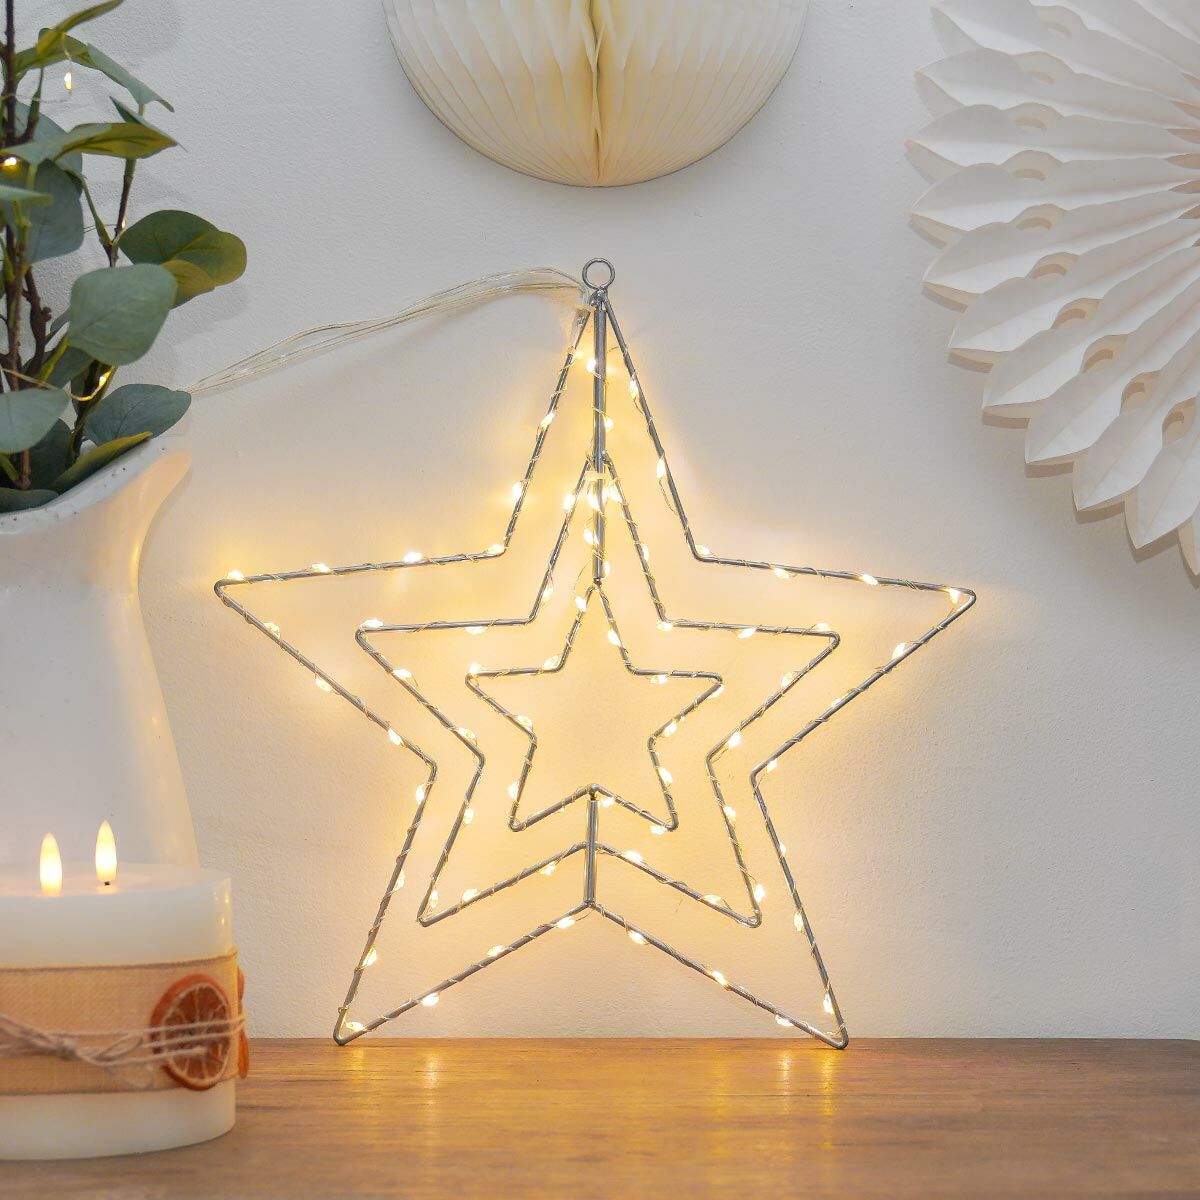 ConnectGo® Outdoor 3 Framed Wire Star Christmas Silhouette, Connectable image 4